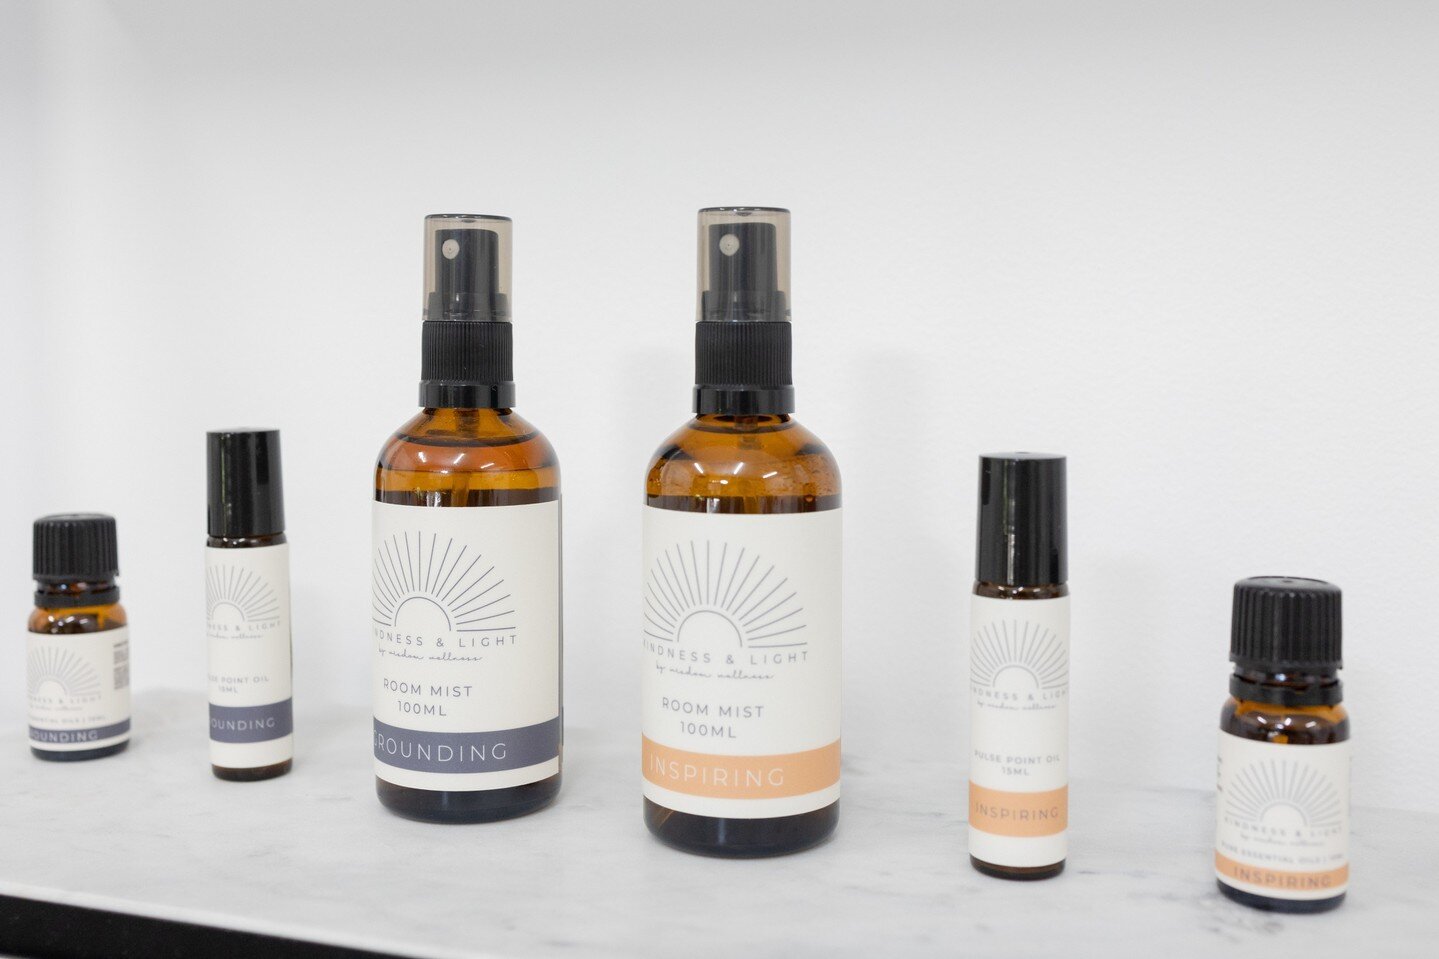 BESPOKE SELF-CARE PRODUCTS NOW AVAILABLE ➖

I am so excited to announce that my Kindness &amp; Light self-care products are now available for purchase both at my Subiaco private practice and online!

I created both the Grounding and Inspiring ranges 